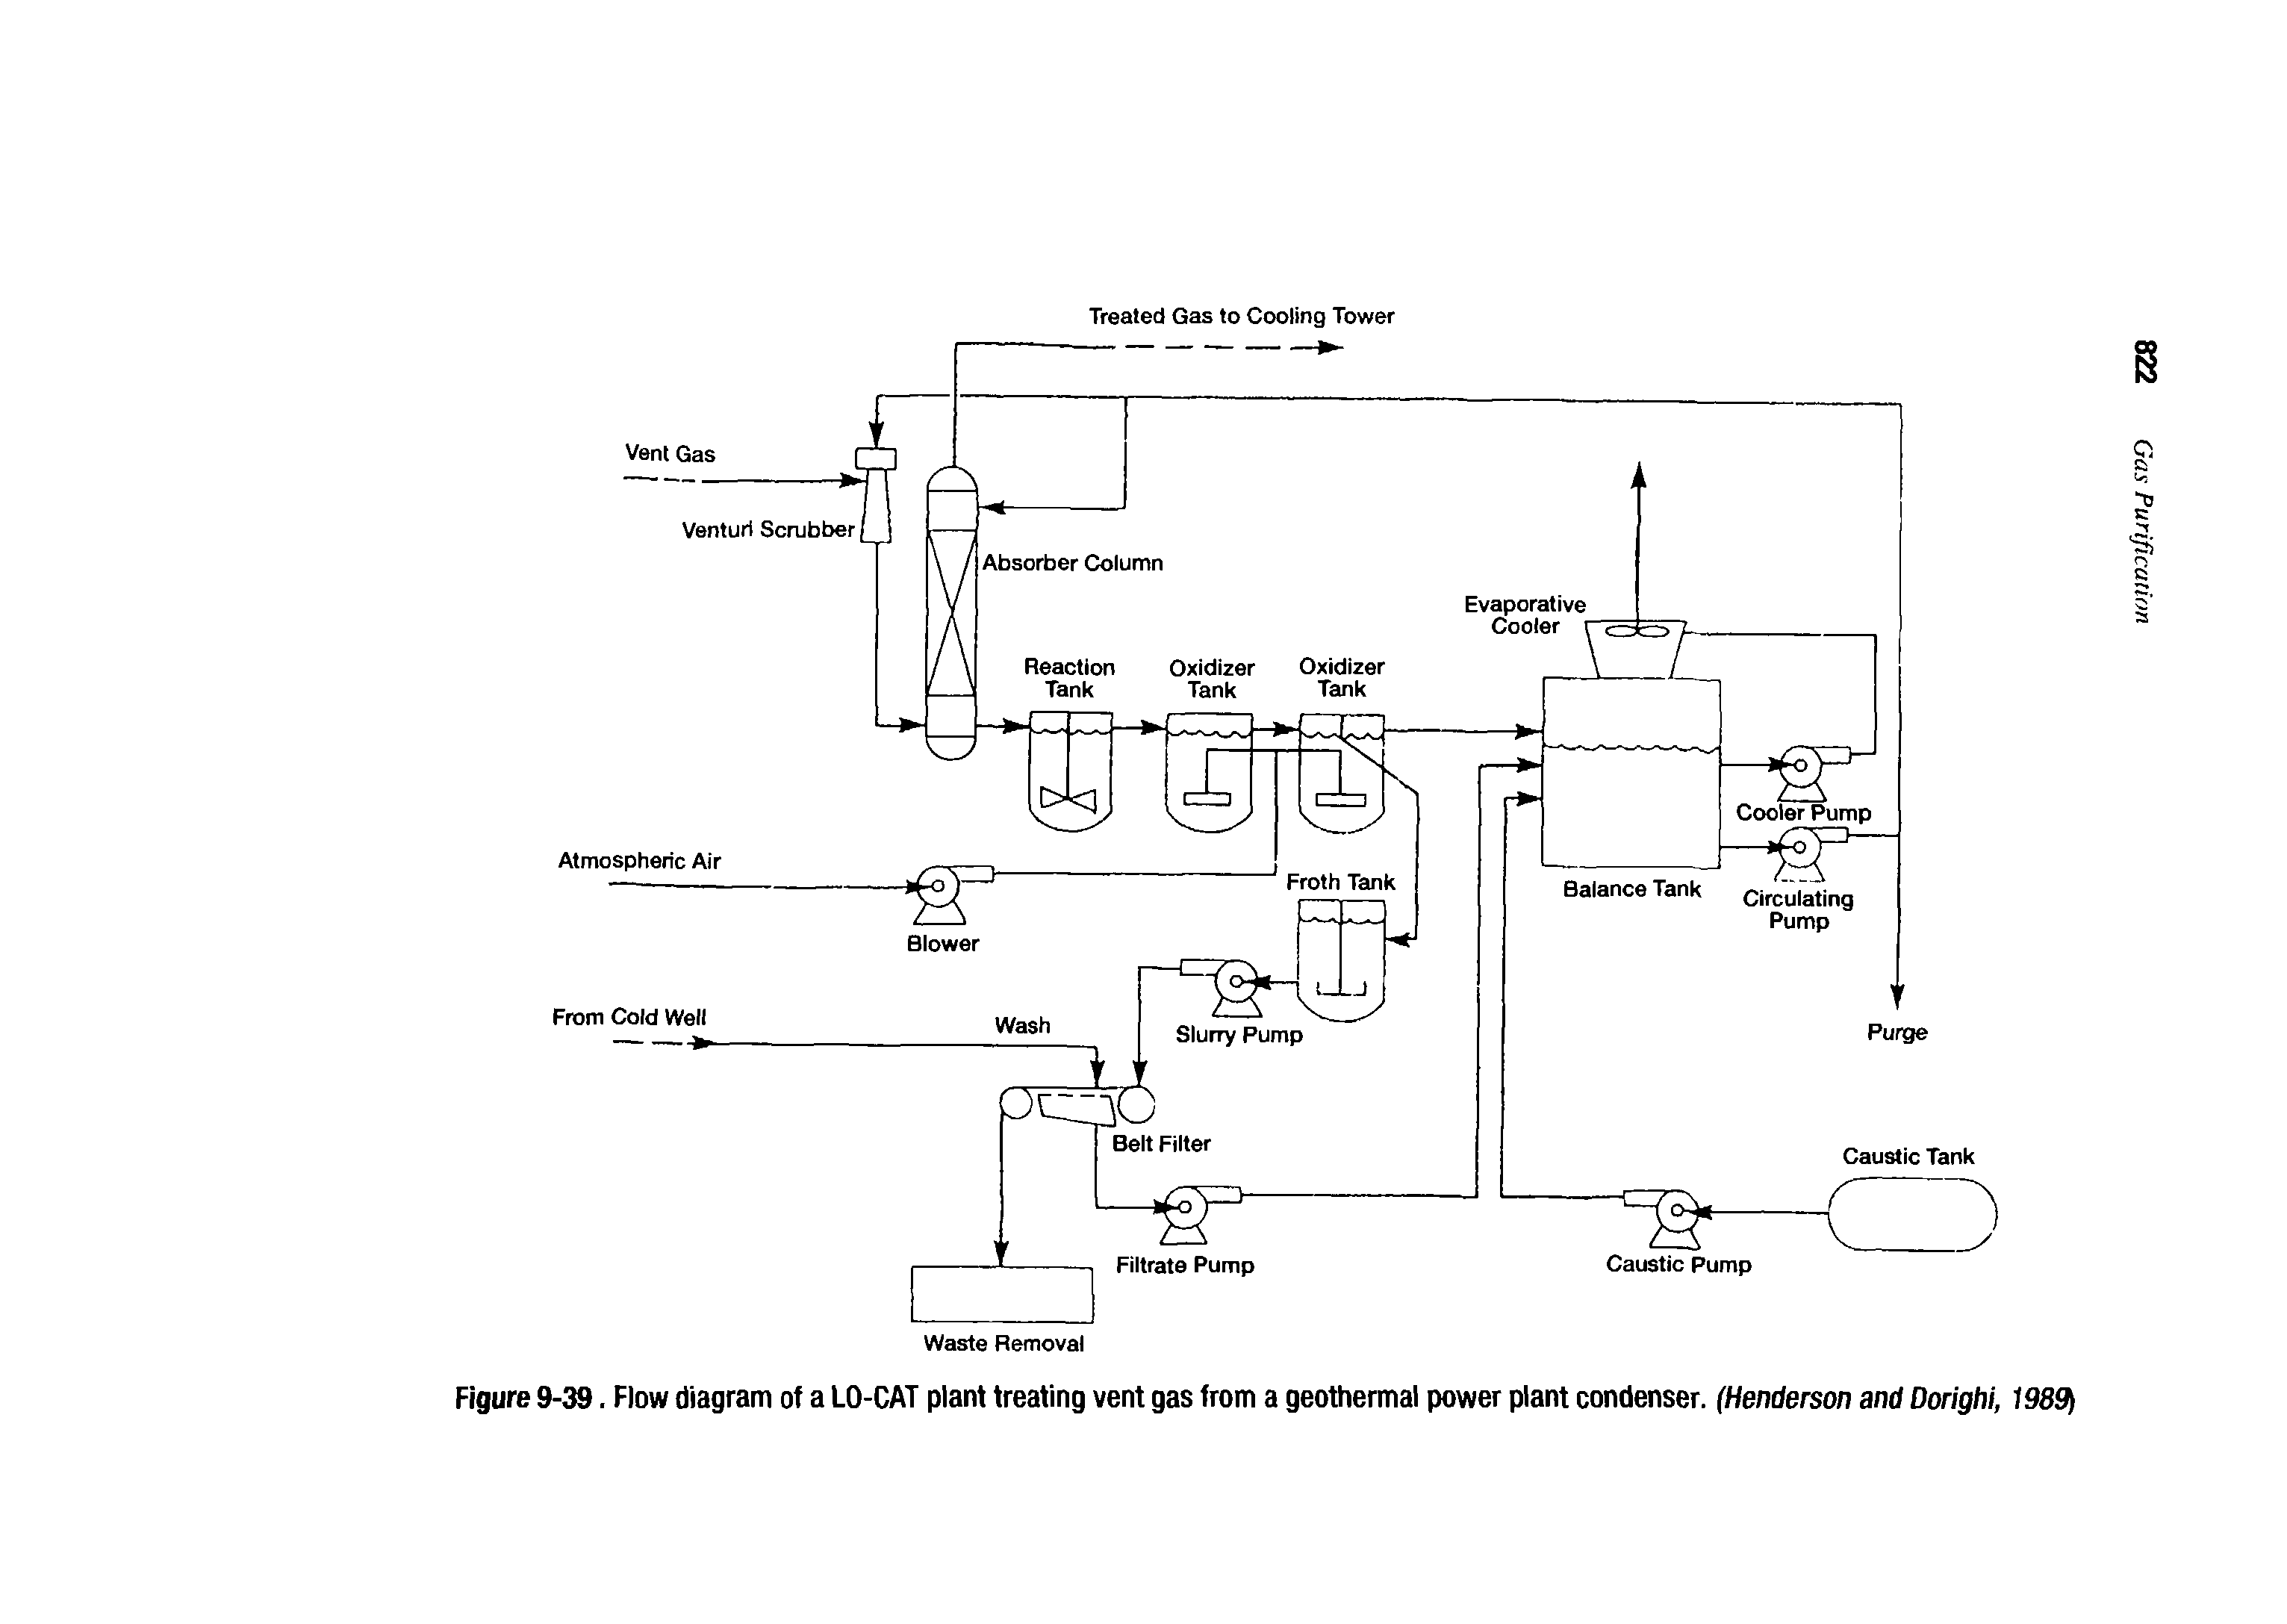 Figure 9-39. Flow diagram of a LO-CAT plant treating vent gas from a geothermal power plant condenser. (Henderson and Dorighi, 1989)...